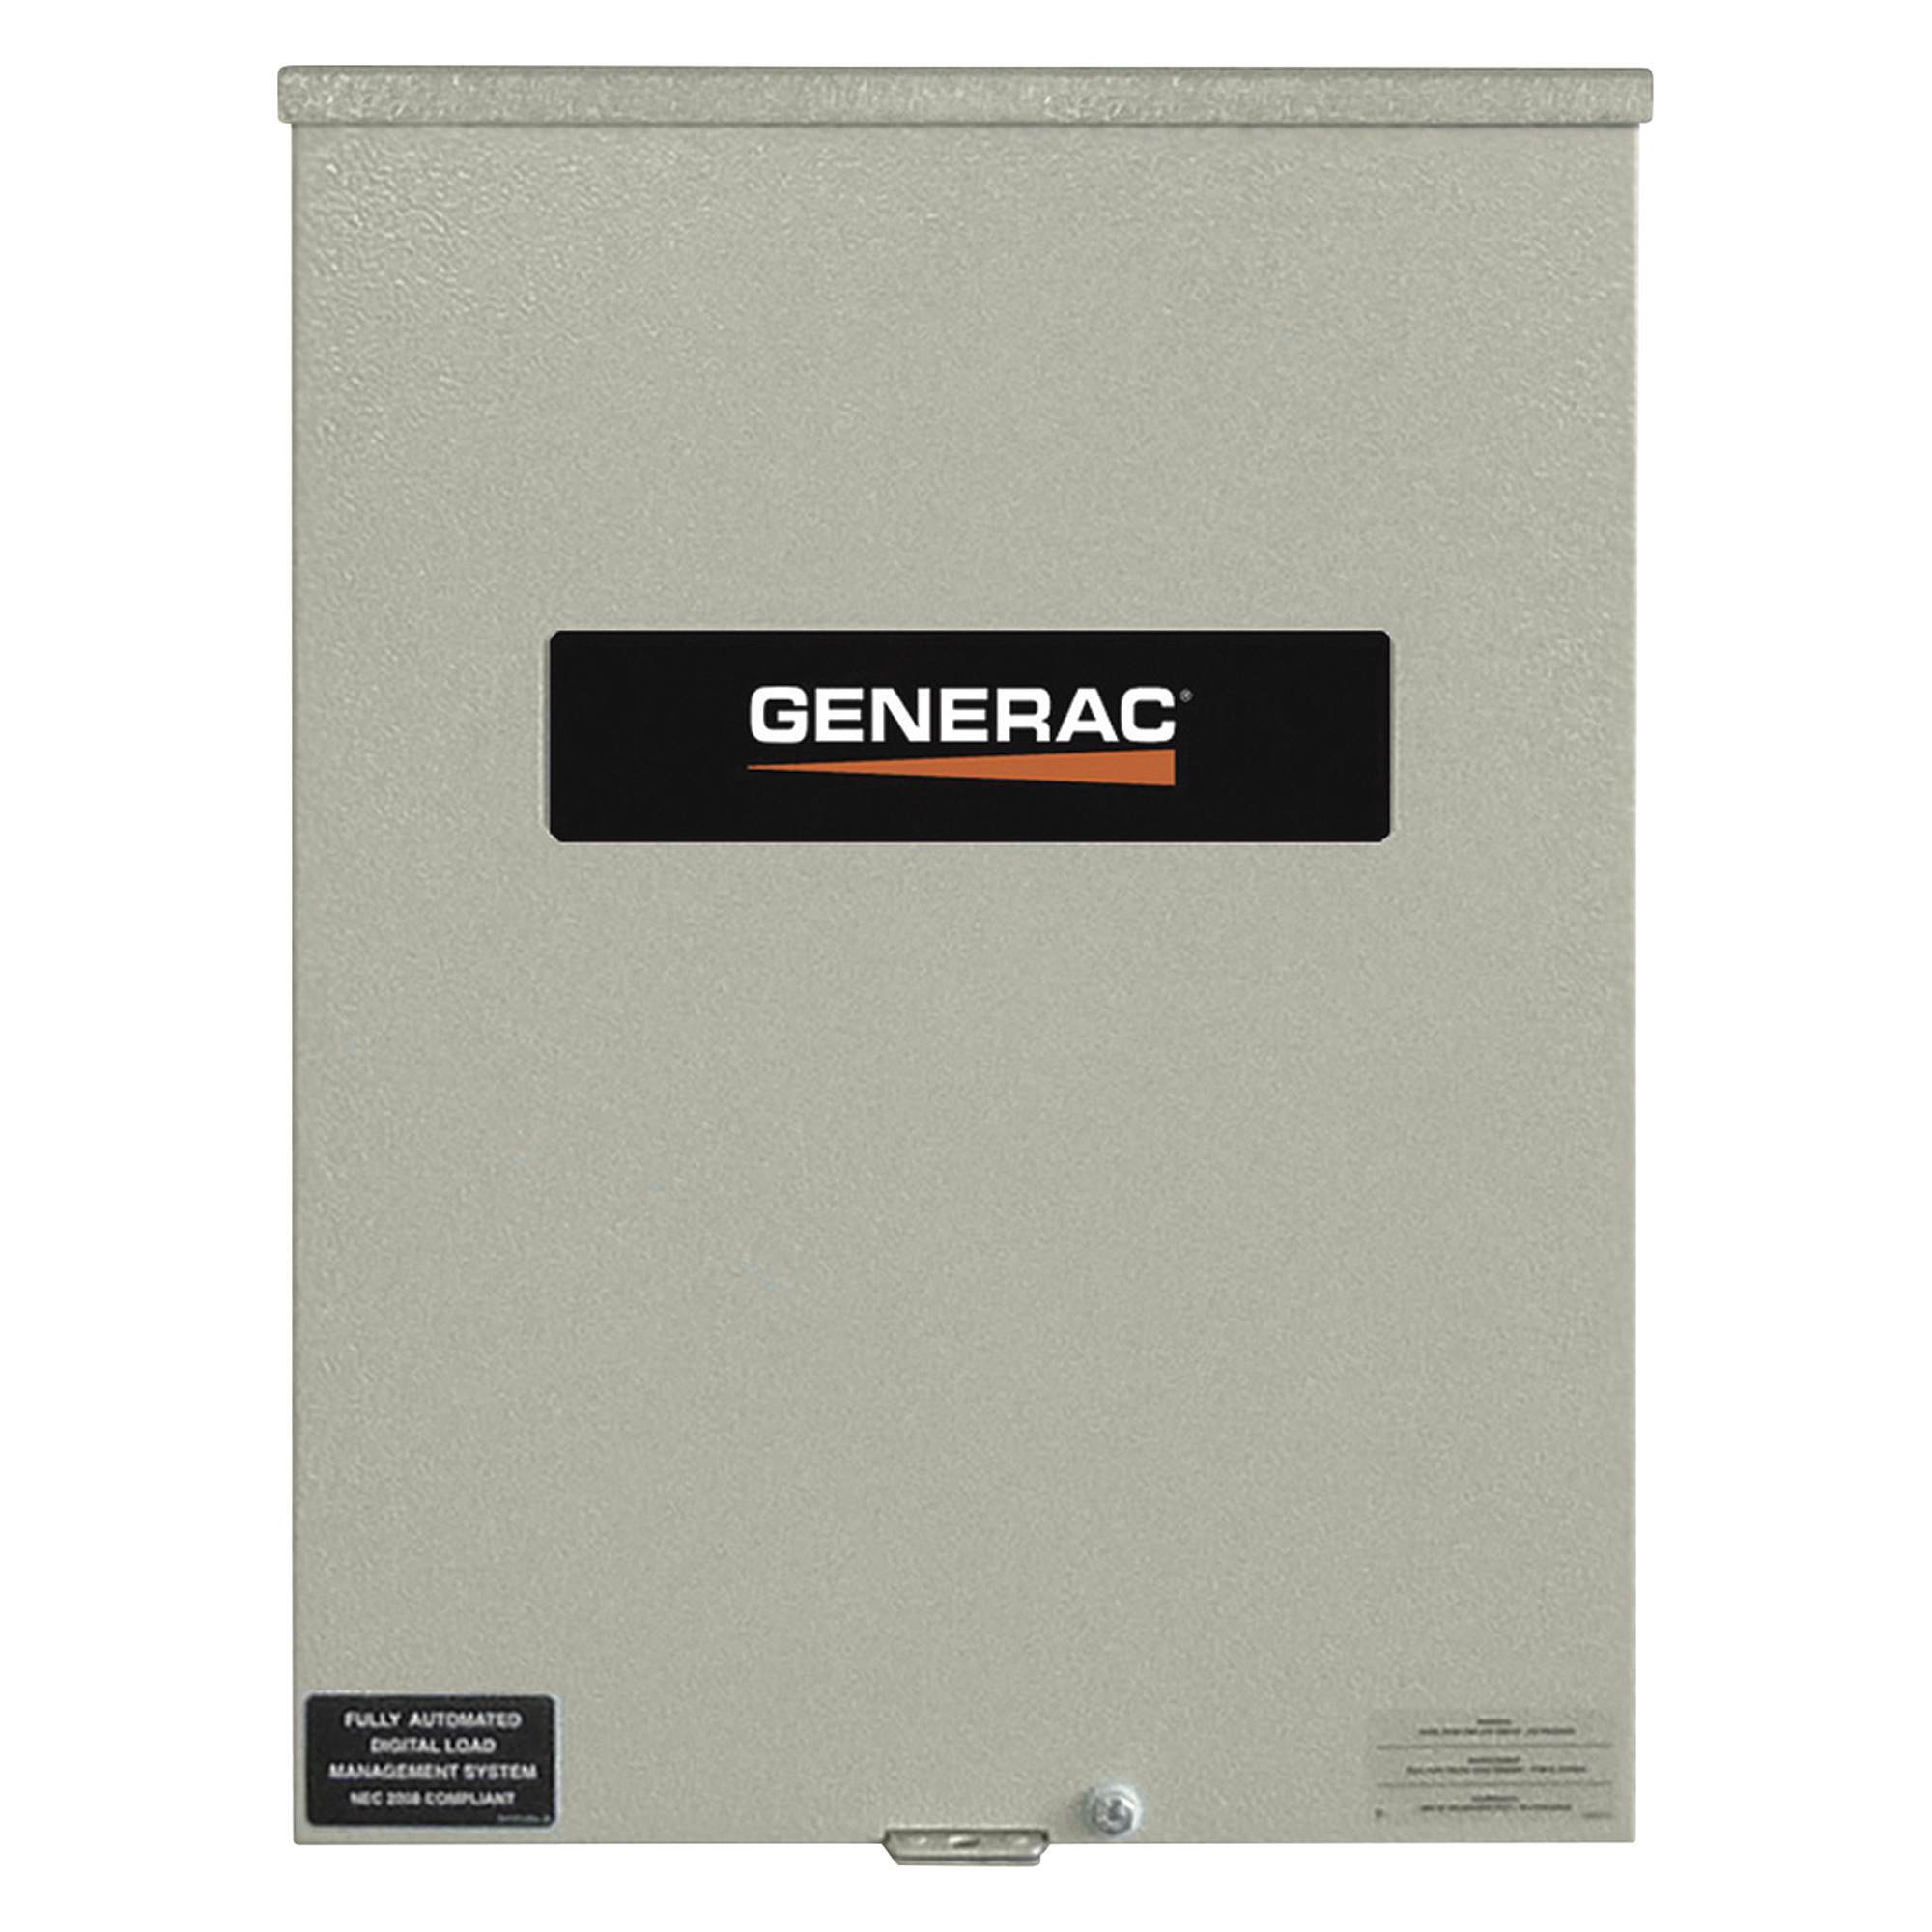 Generac Smart Switch Automatic Generator Transfer Switch, 400 Amps, 120/240 Volts, Model RTSW400A3